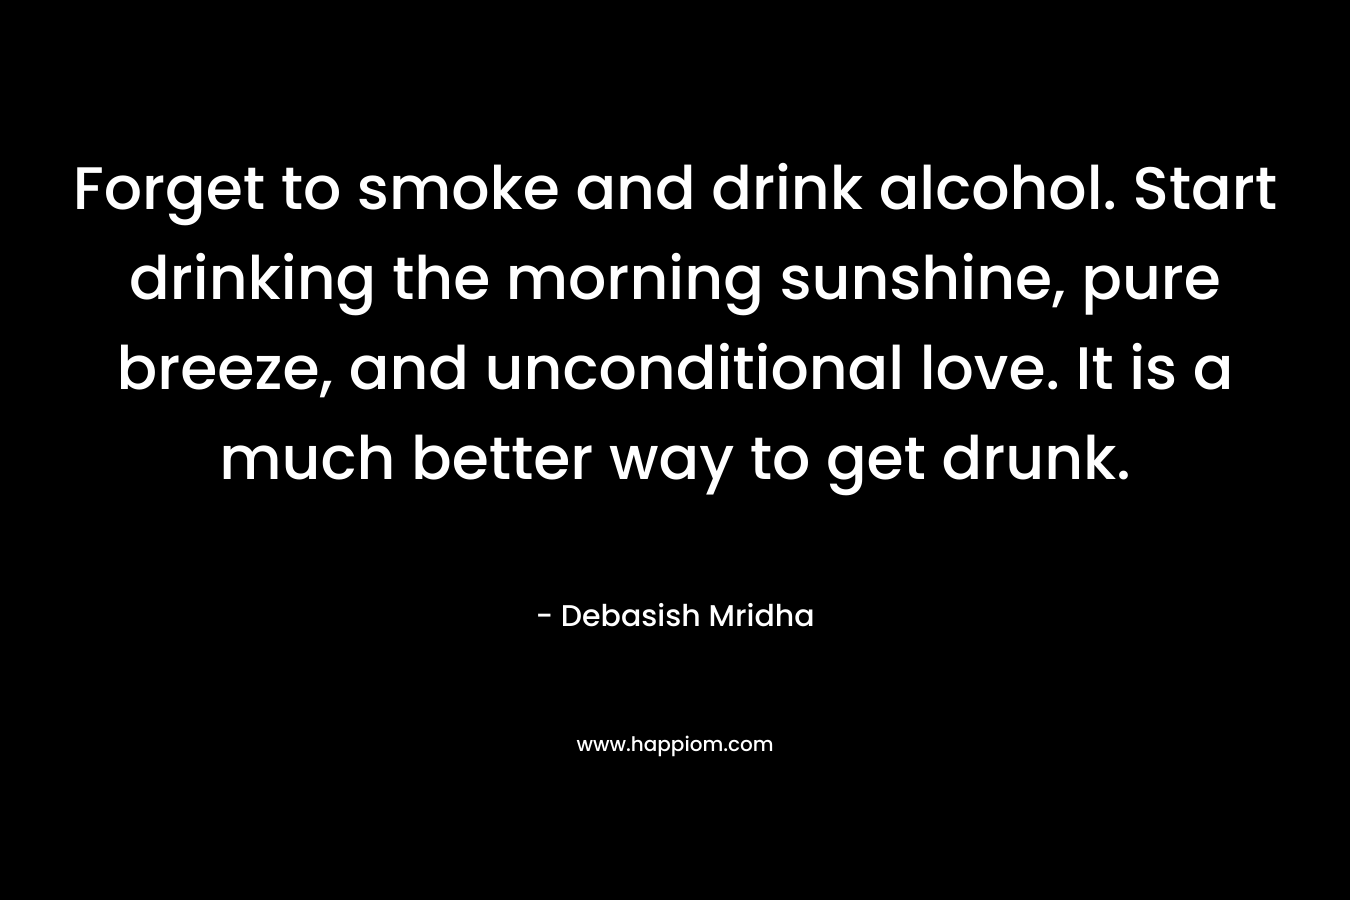 Forget to smoke and drink alcohol. Start drinking the morning sunshine, pure breeze, and unconditional love. It is a much better way to get drunk. – Debasish Mridha